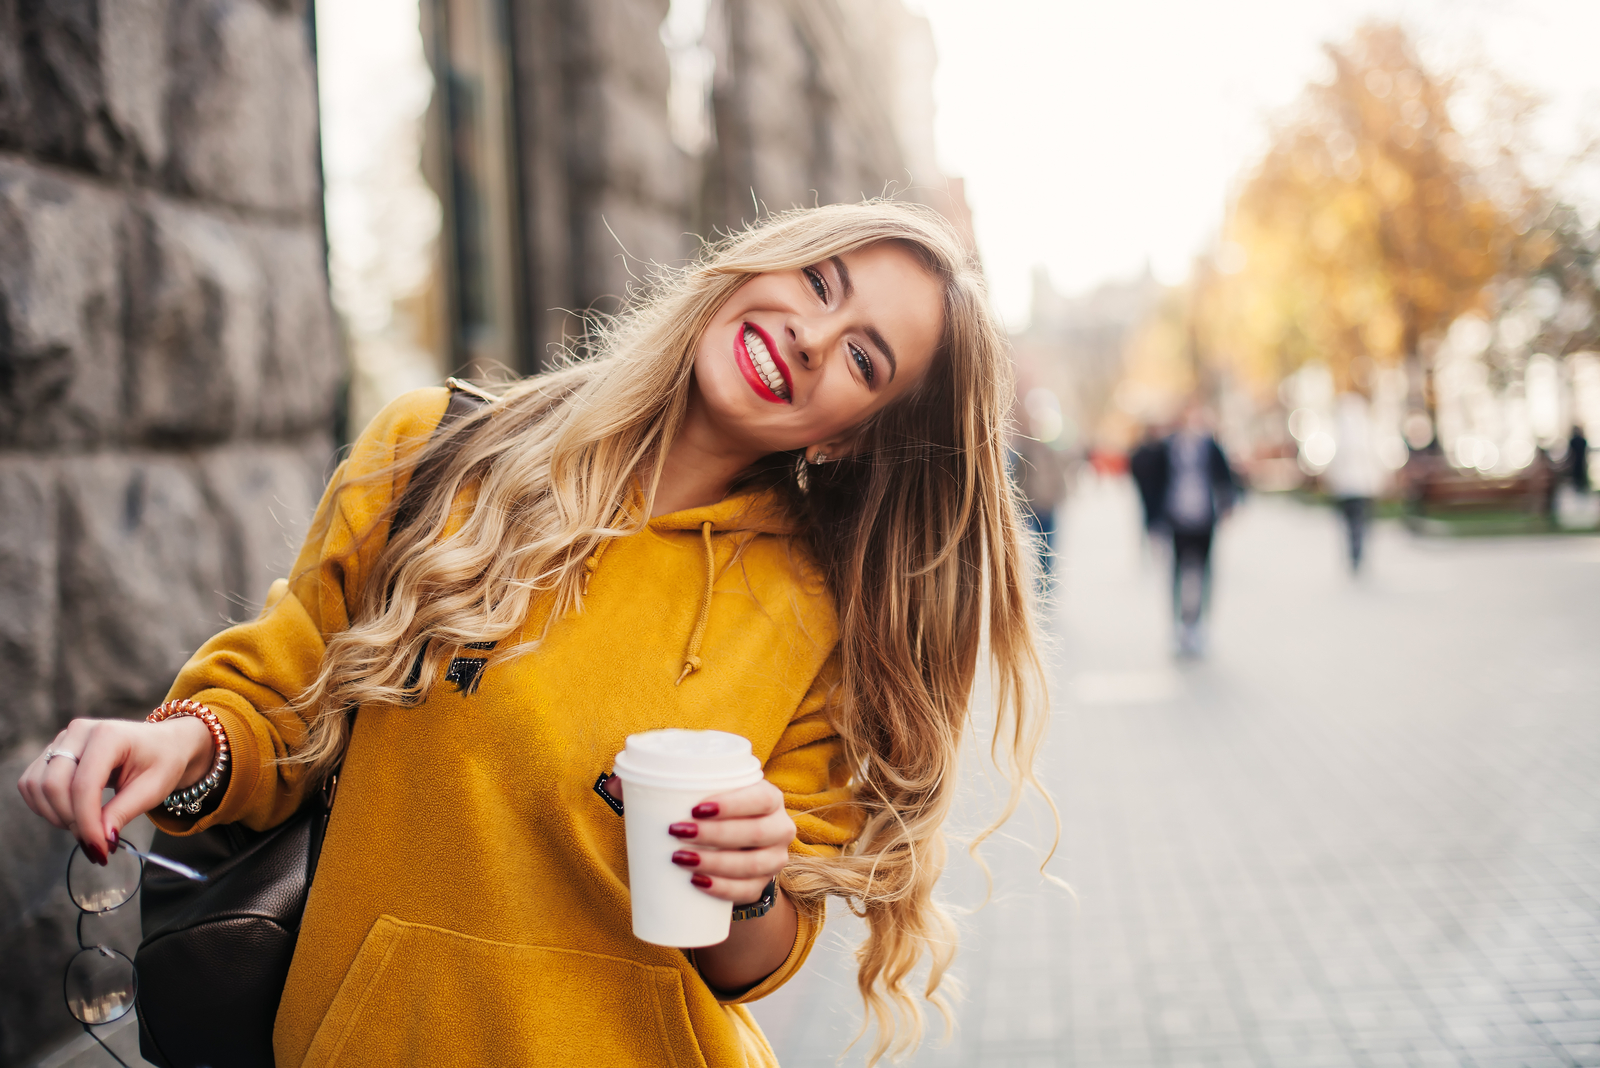 happy woman in yellow holding a cup of coffee